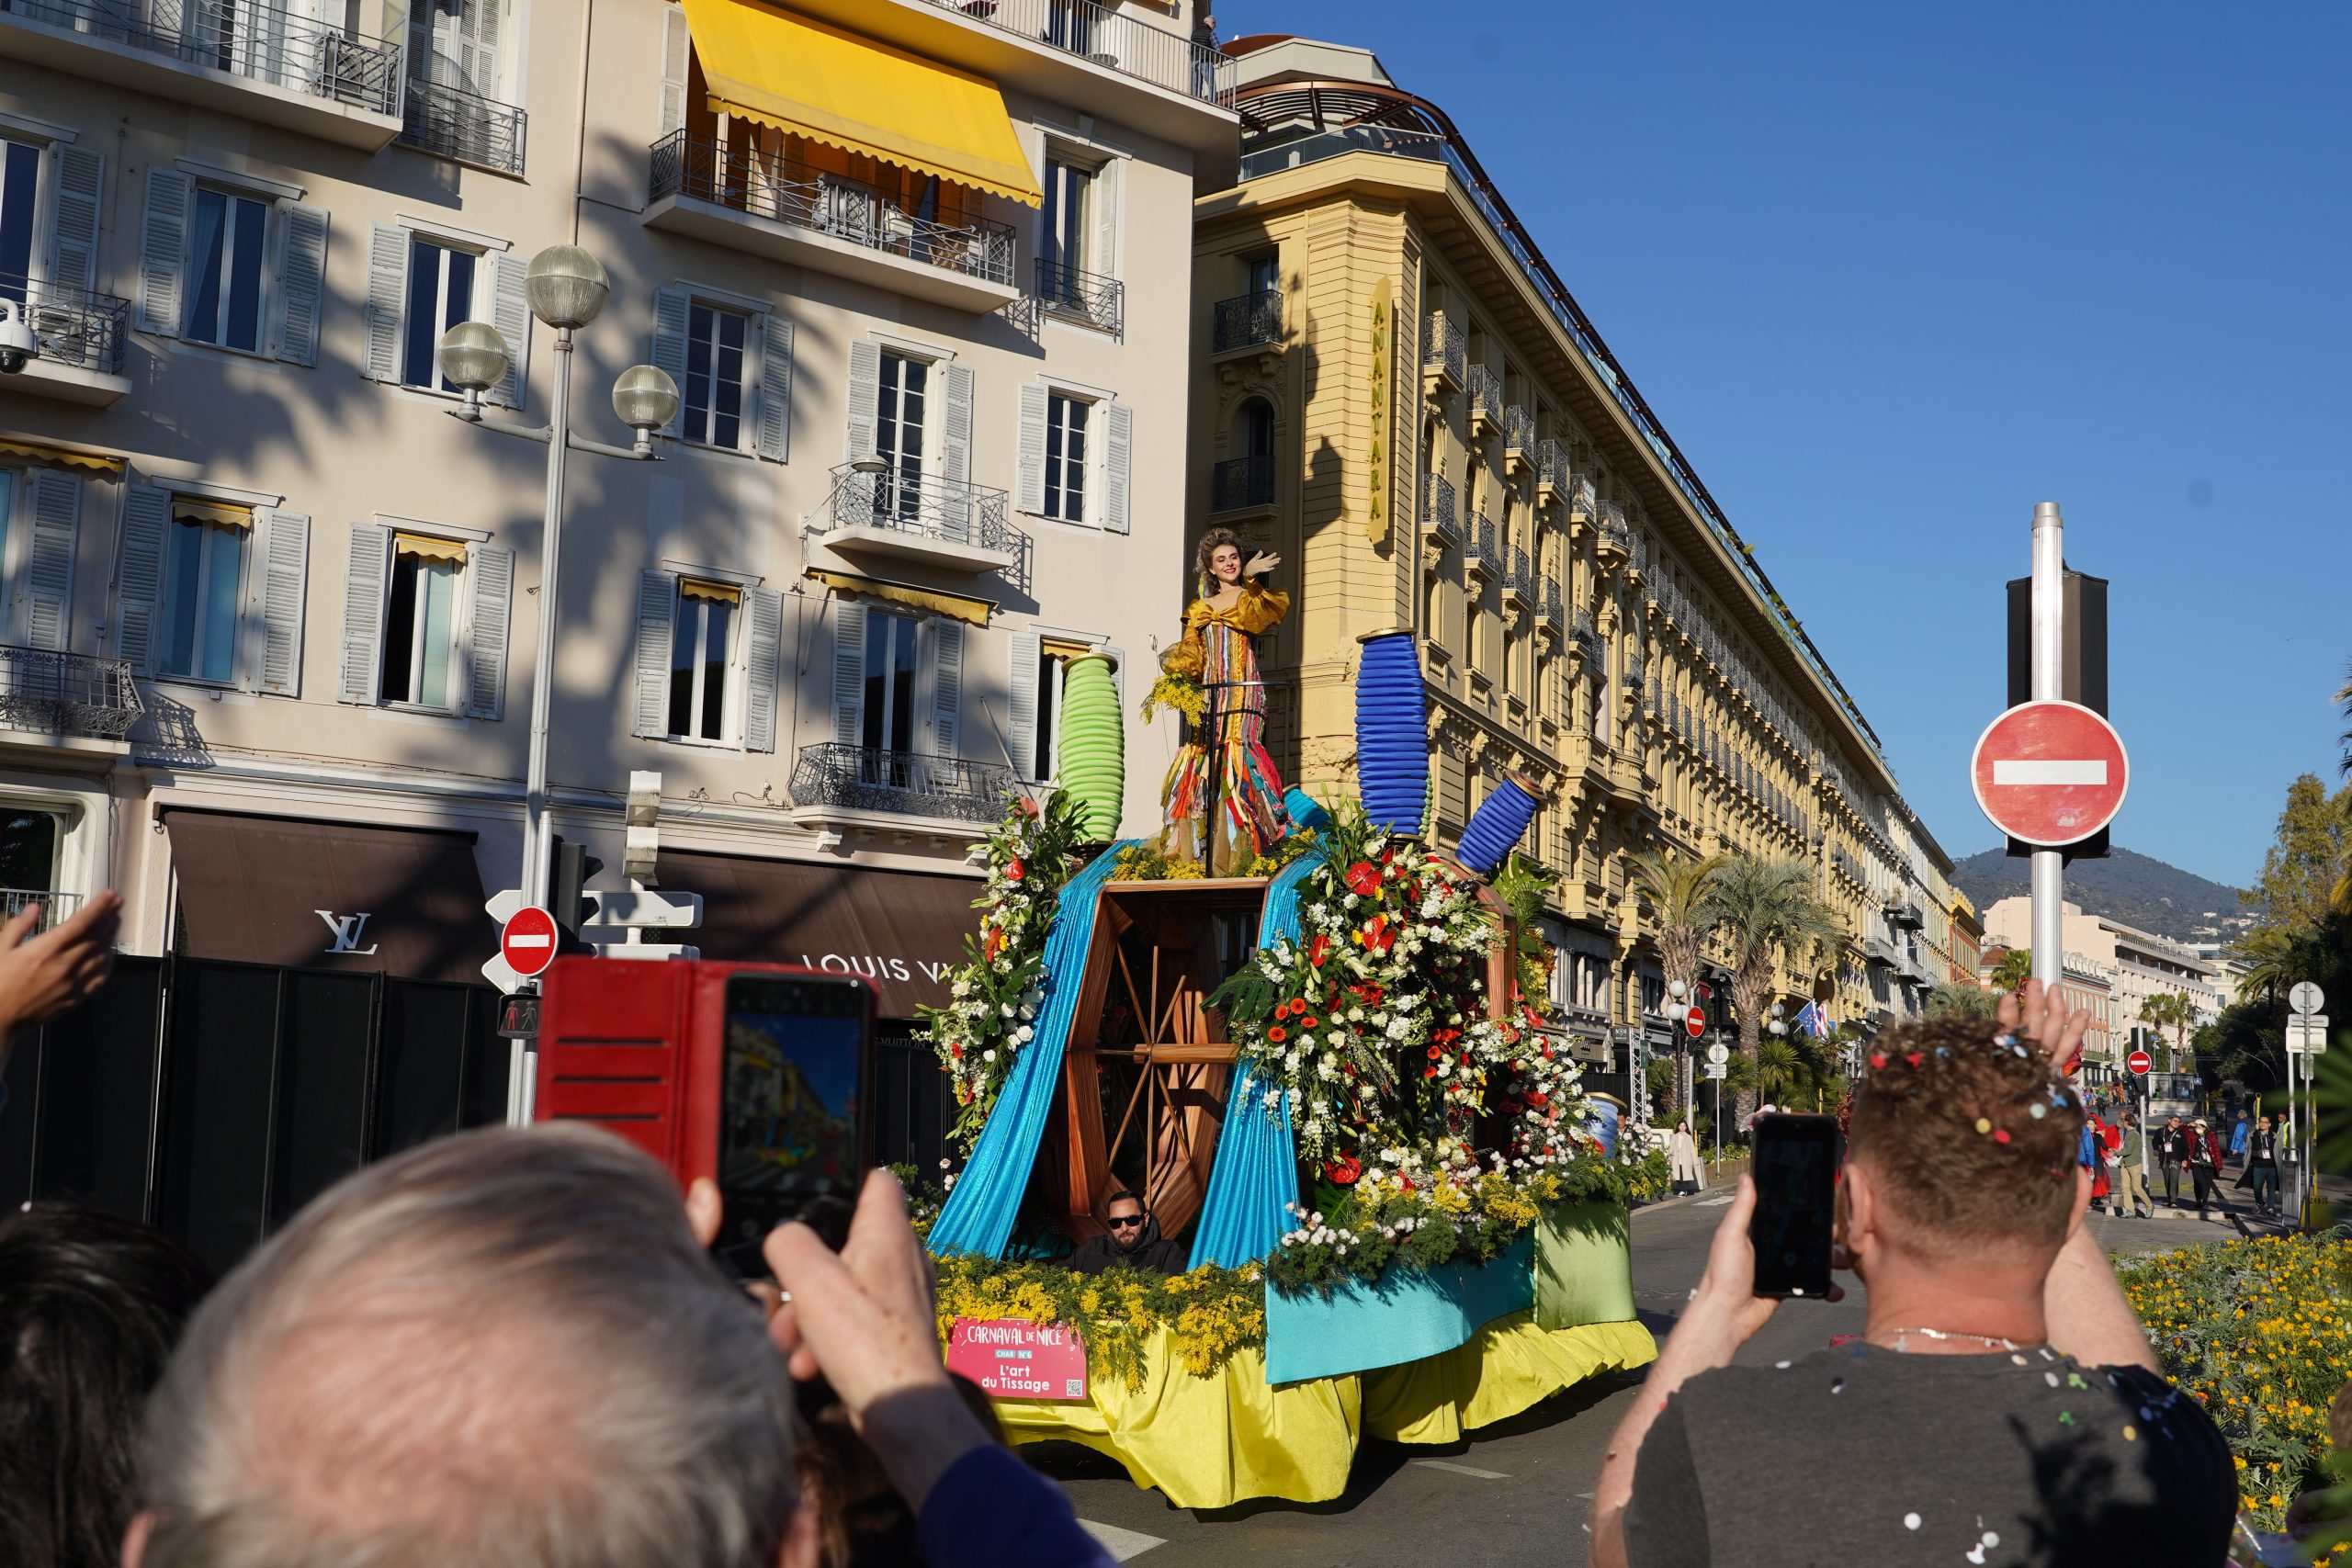 The carnival is a celebration of the local culture and traditions of Nice, and it features many local musicians, dancers, and other performers showcasing their talents.